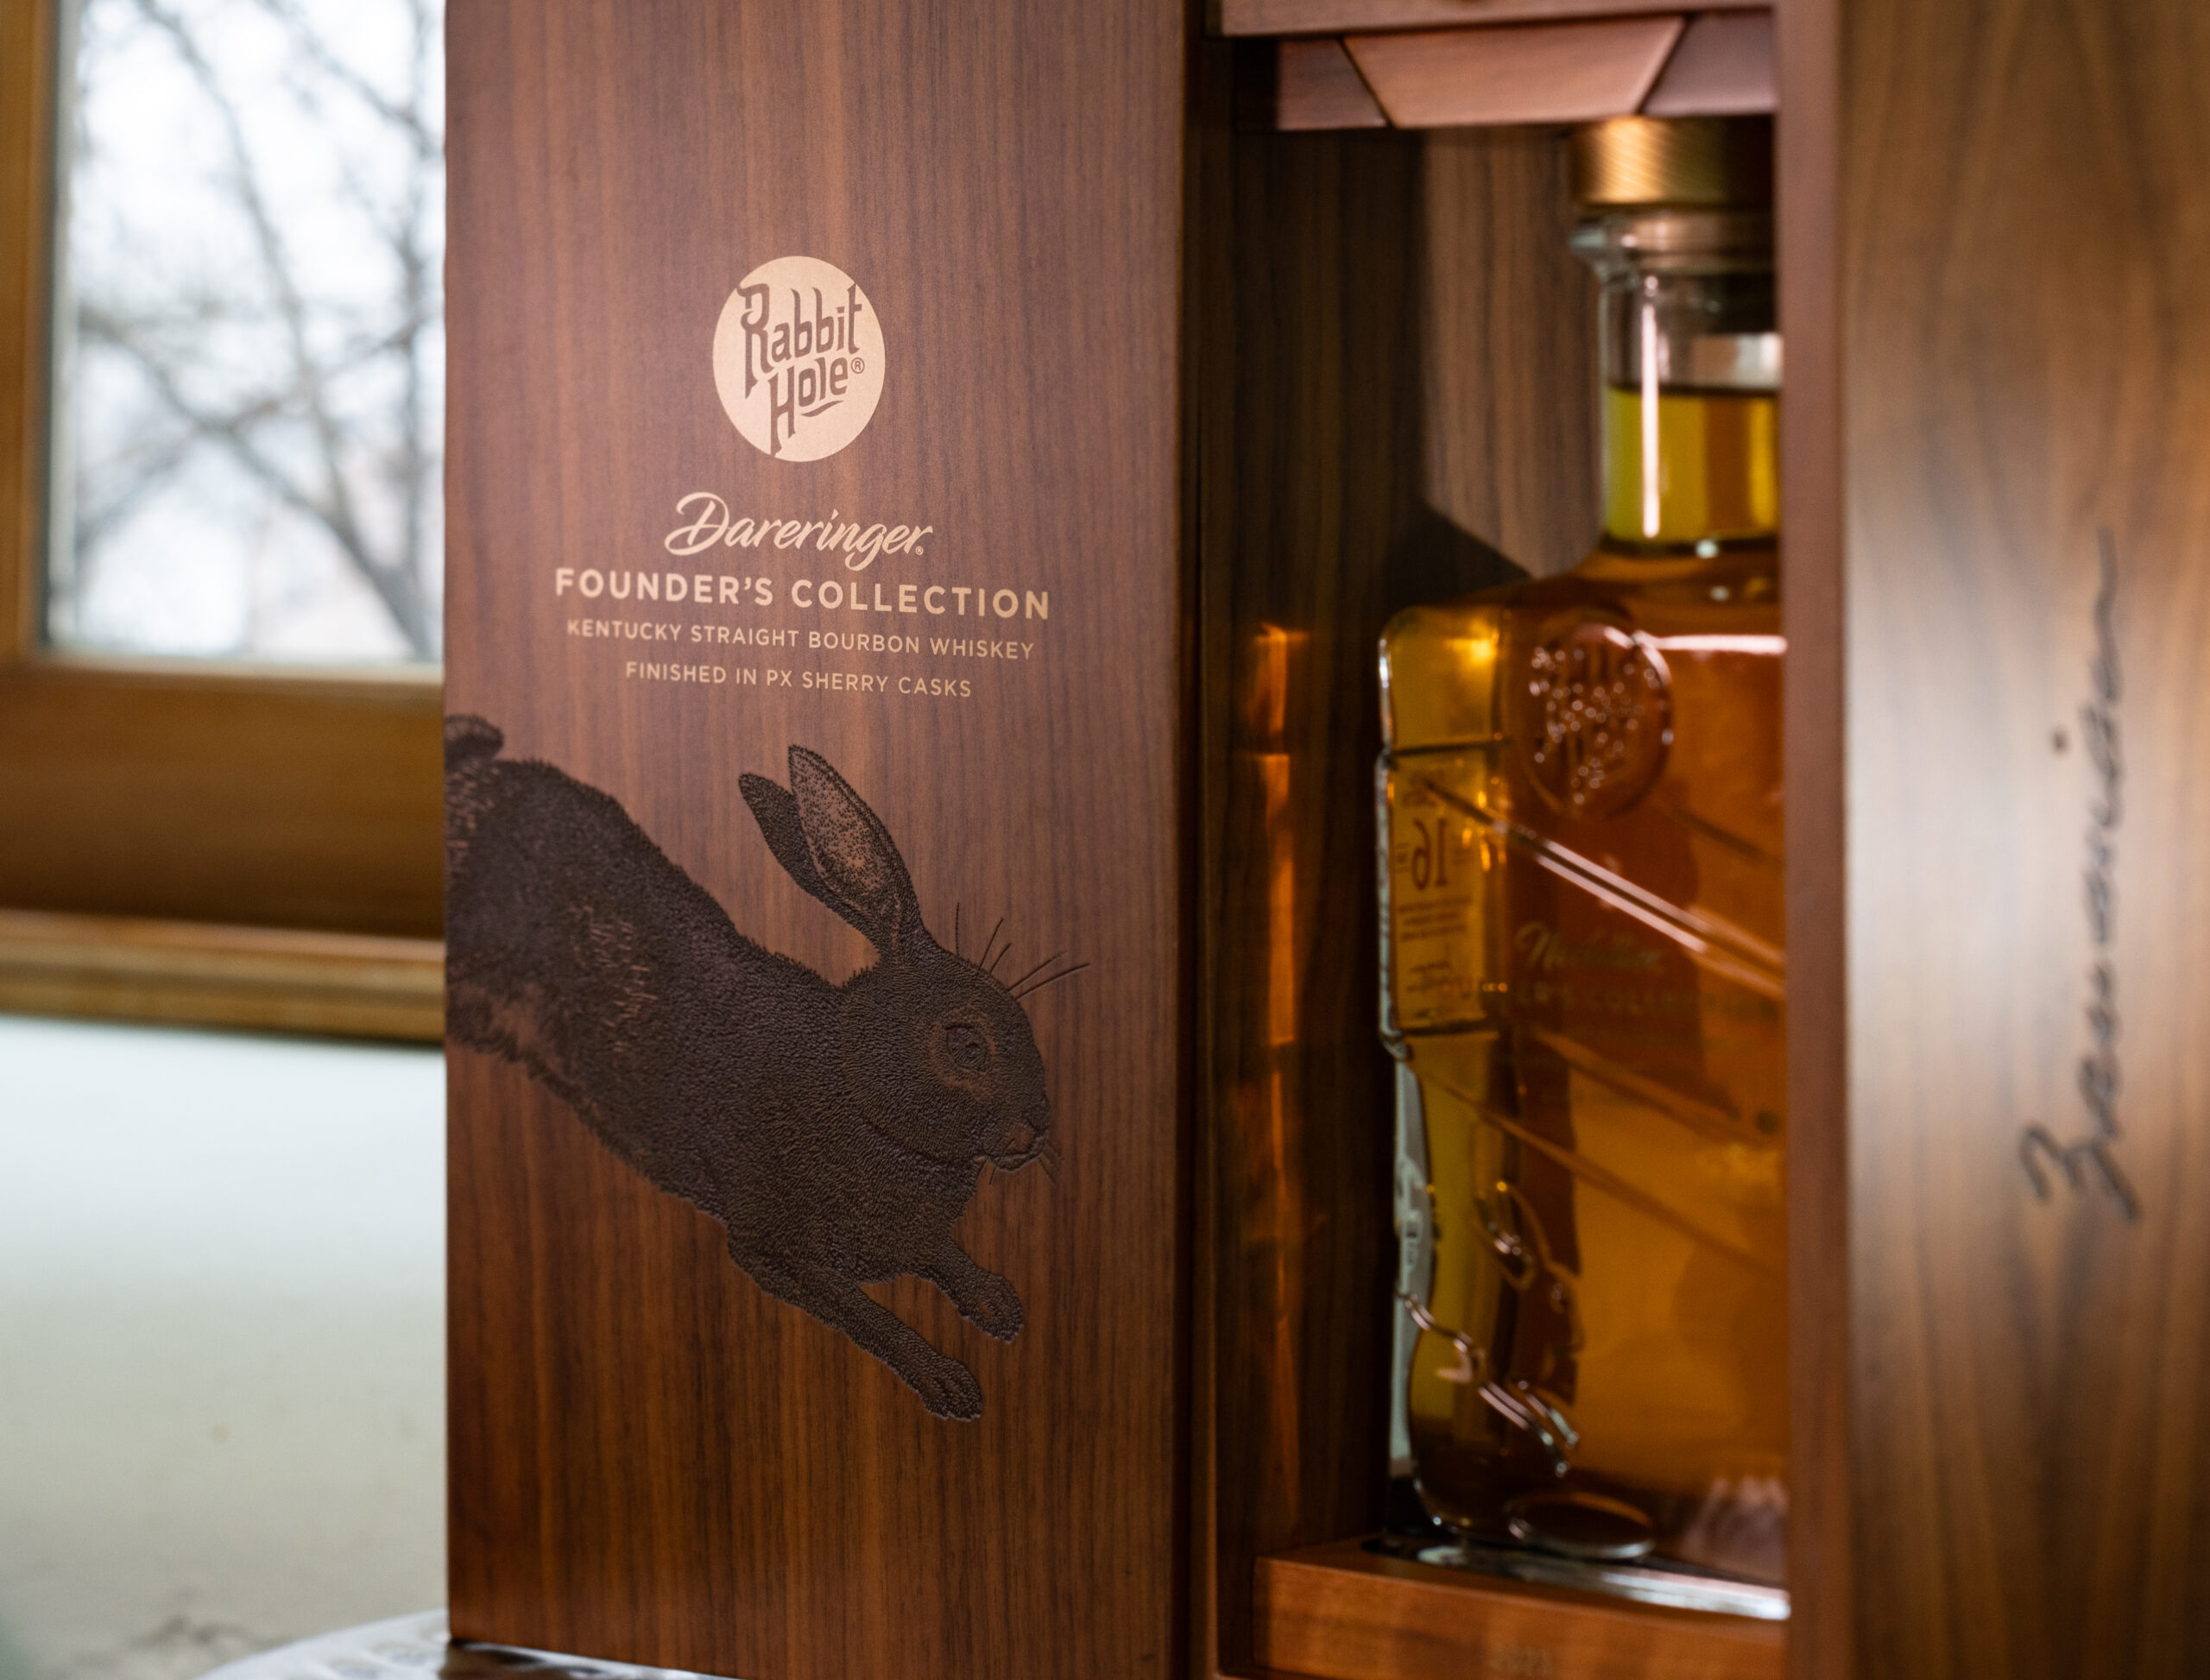 brand packaging for Rabbit Hole: wooden box with rabbit design on the outside and Rabbit Hole logo. Glass bottle of alcohol inside. Text on the box says "Dareringer. Founder's Collection; Kentucky Straight Bourbon Whiskey, Finished in PX Sherry Casks."